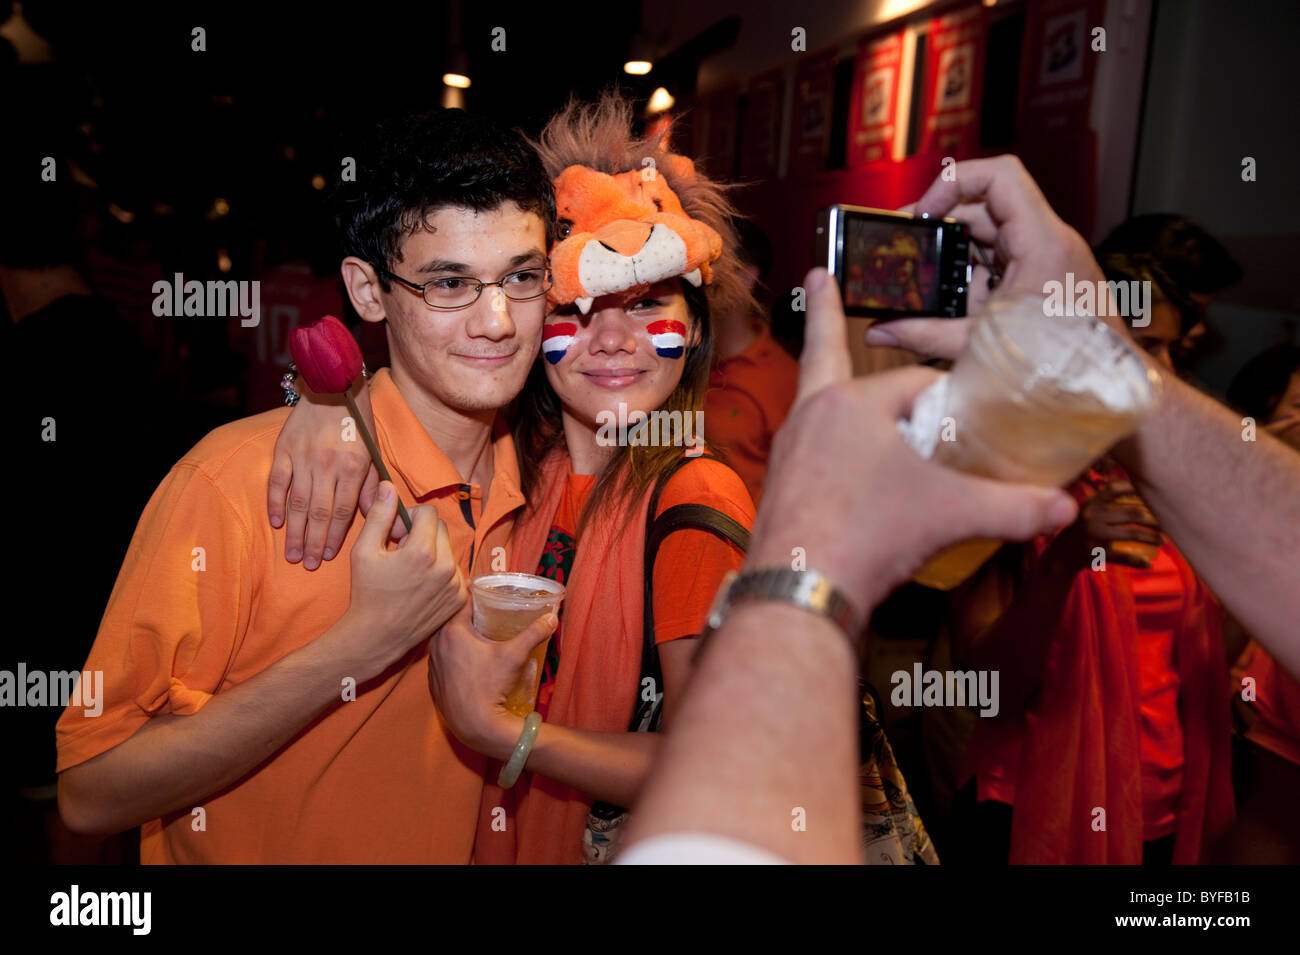 July 12, 2010 World Cup Final between Spain and the Netherlands at the Dutch embassy in Bangkok. Stock Photo